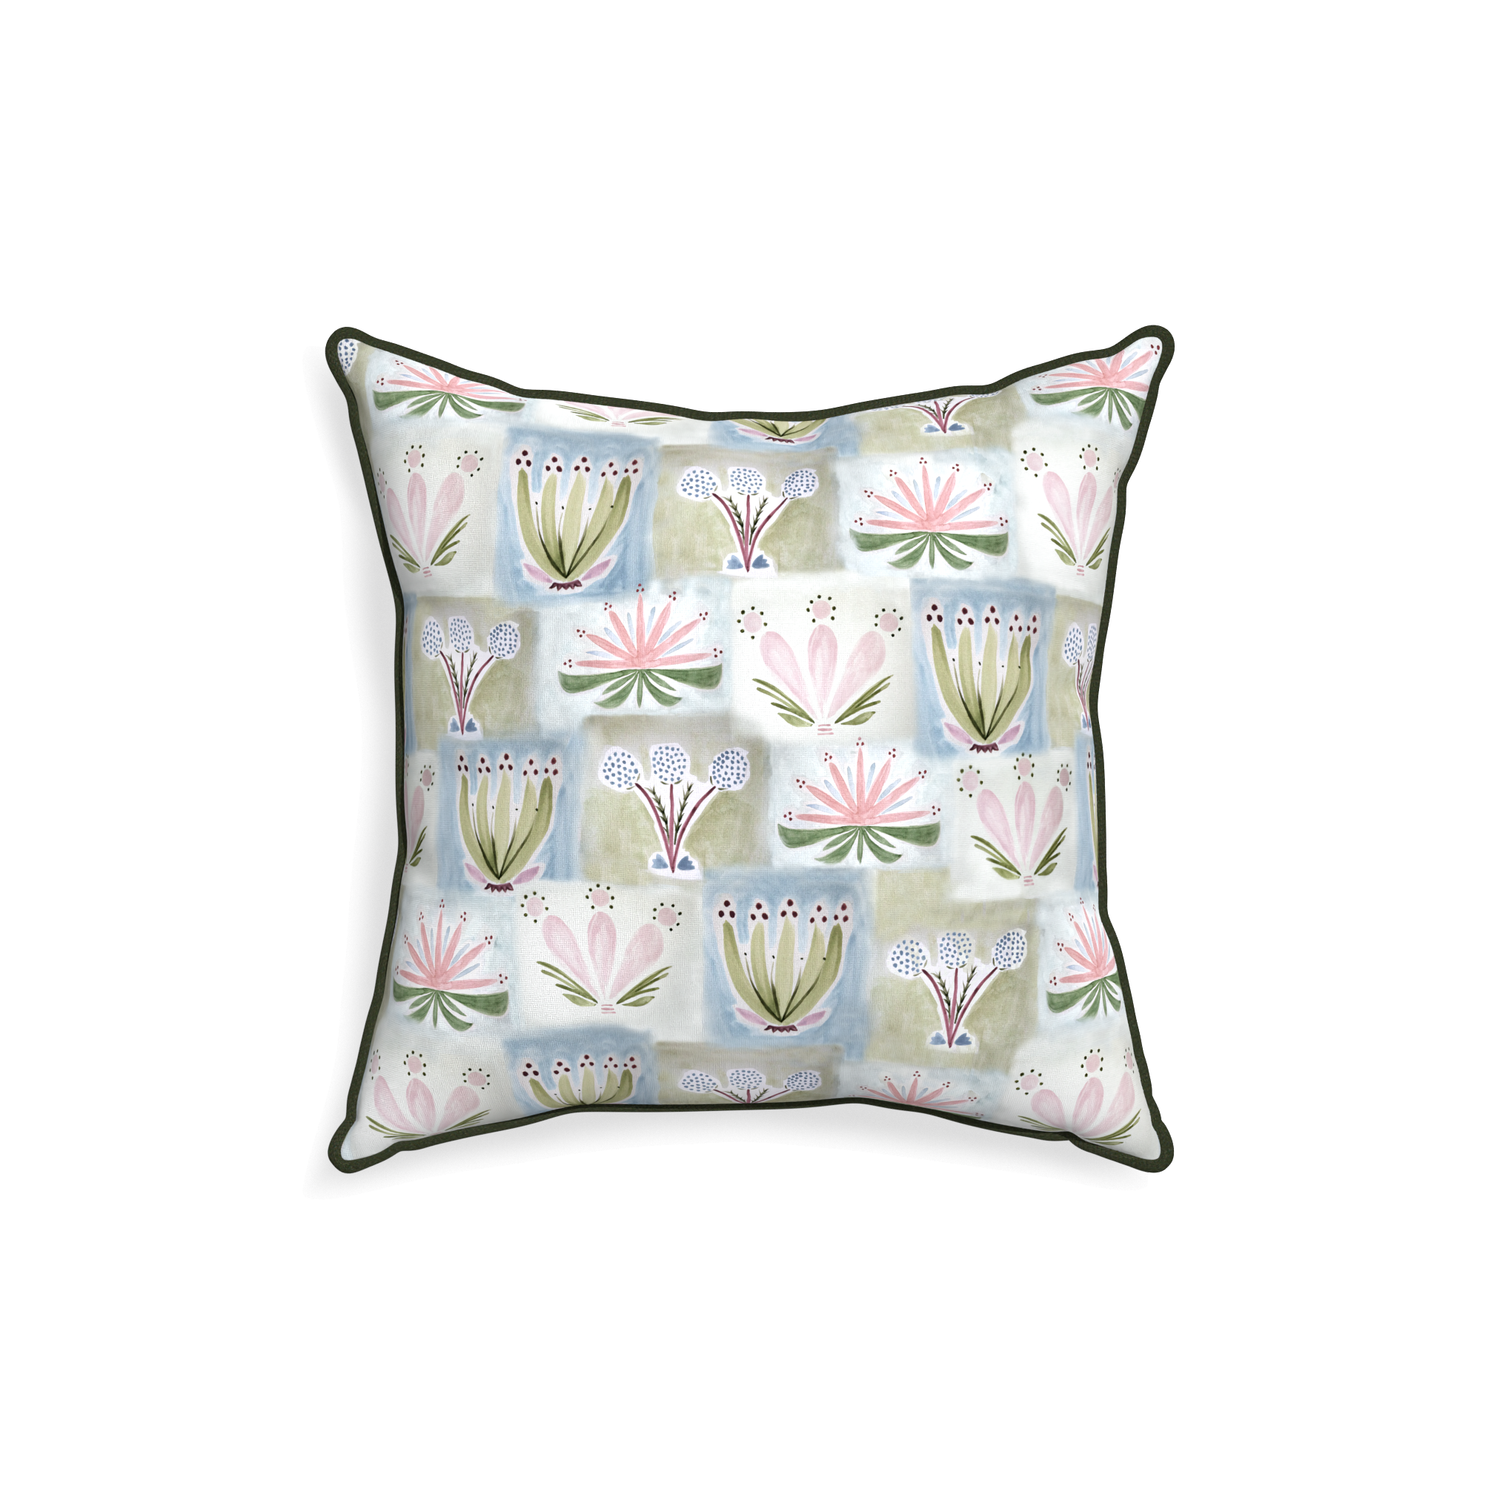 18-square harper custom hand-painted floralpillow with f piping on white background